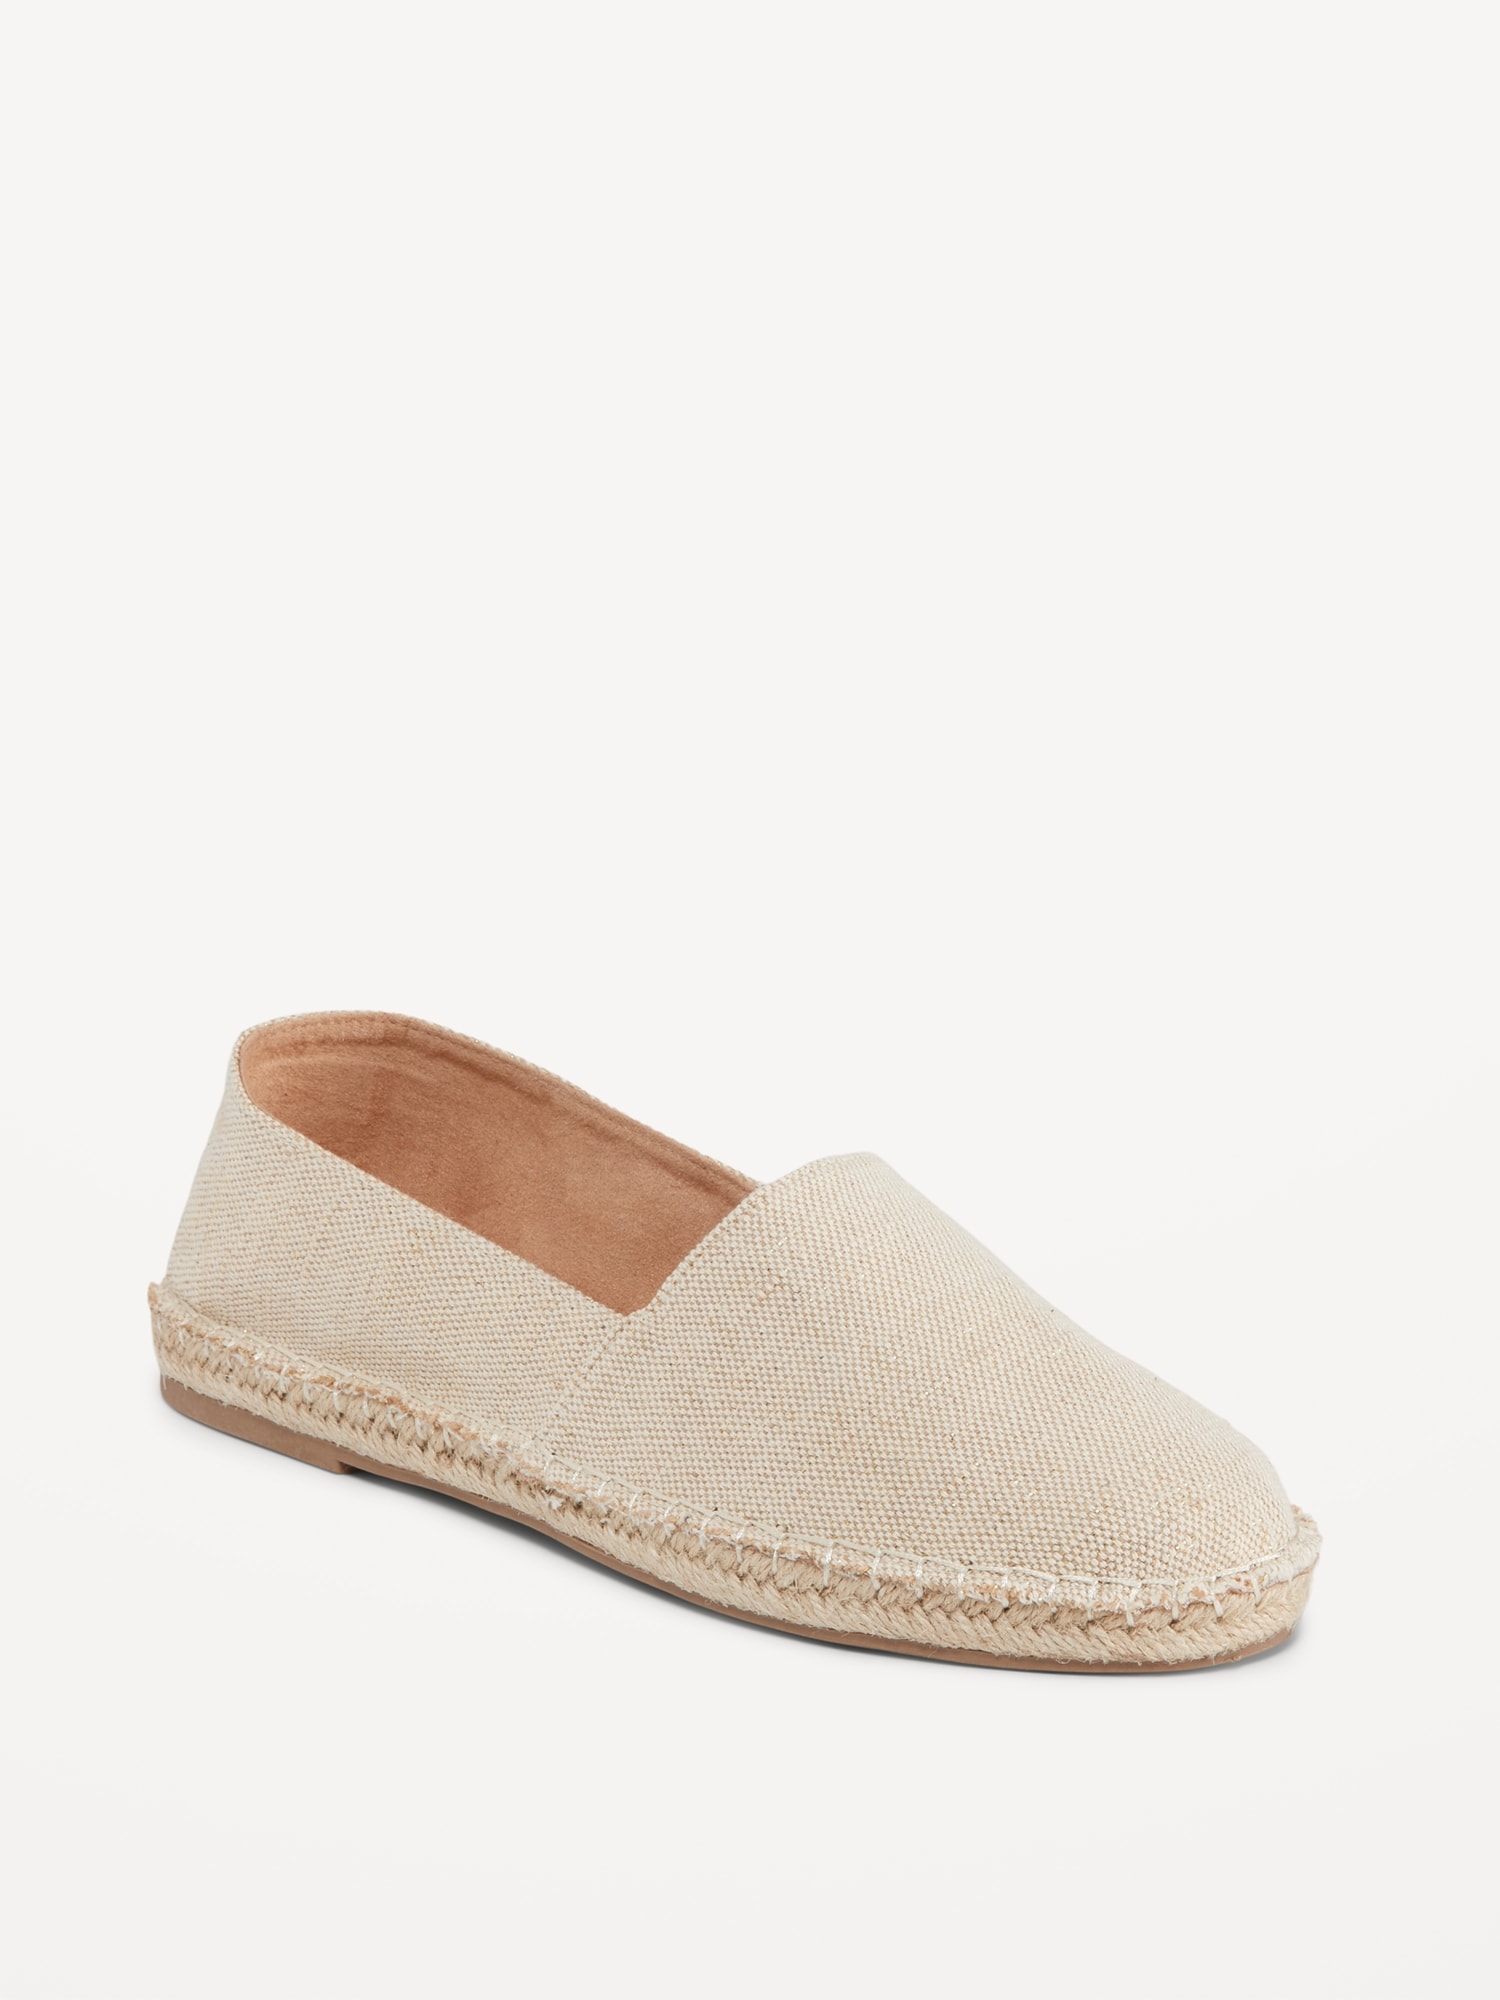 Espadrille Flats for Old Navy